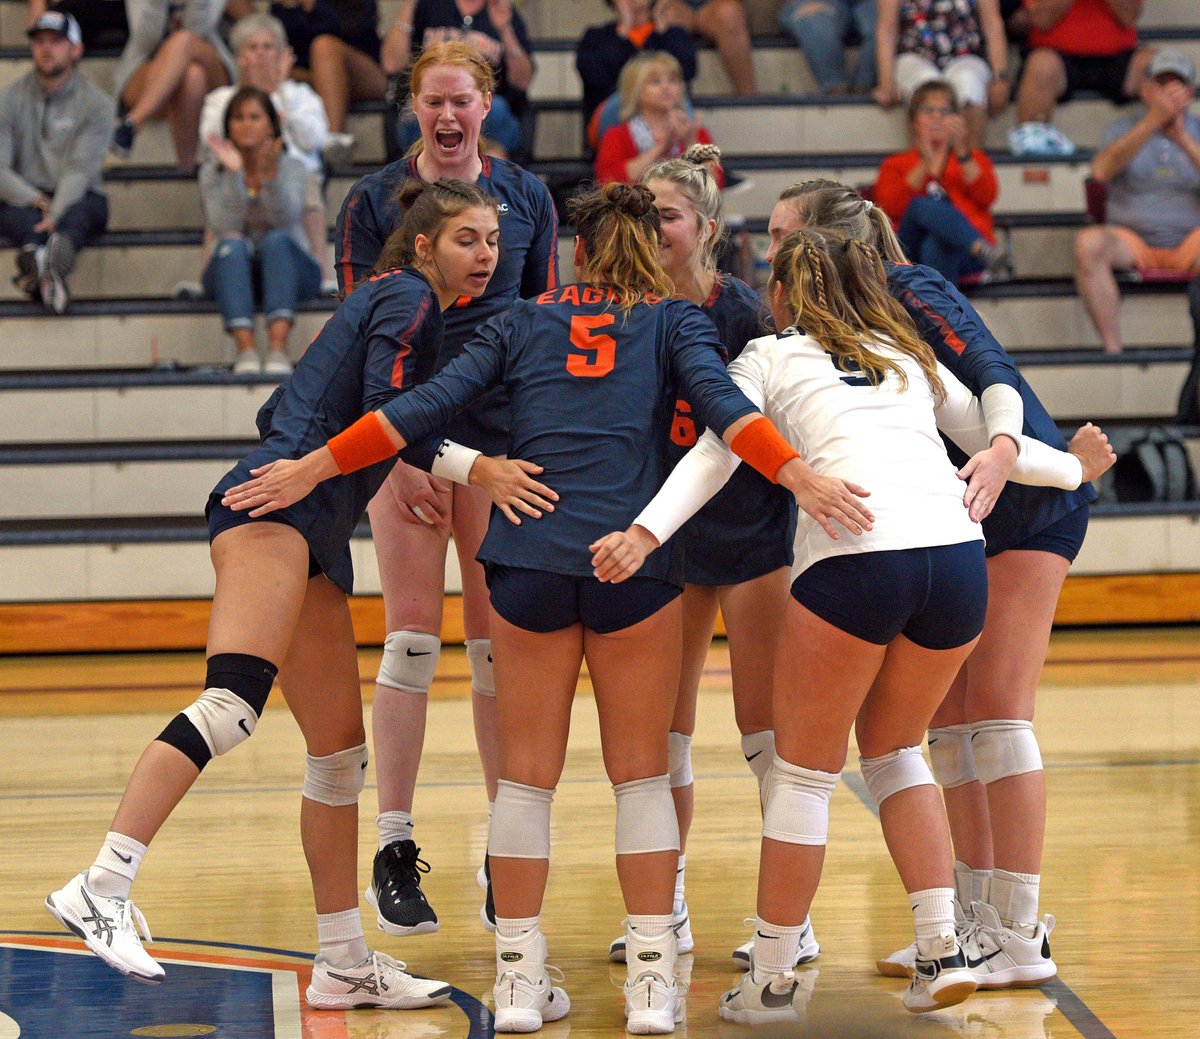 Looking for its first road win of the year, @CarsonNewmanVB heads to the Music City to take on Trevecca Nazarene on Tuesday. 📰 bit.ly/3nNDT2o